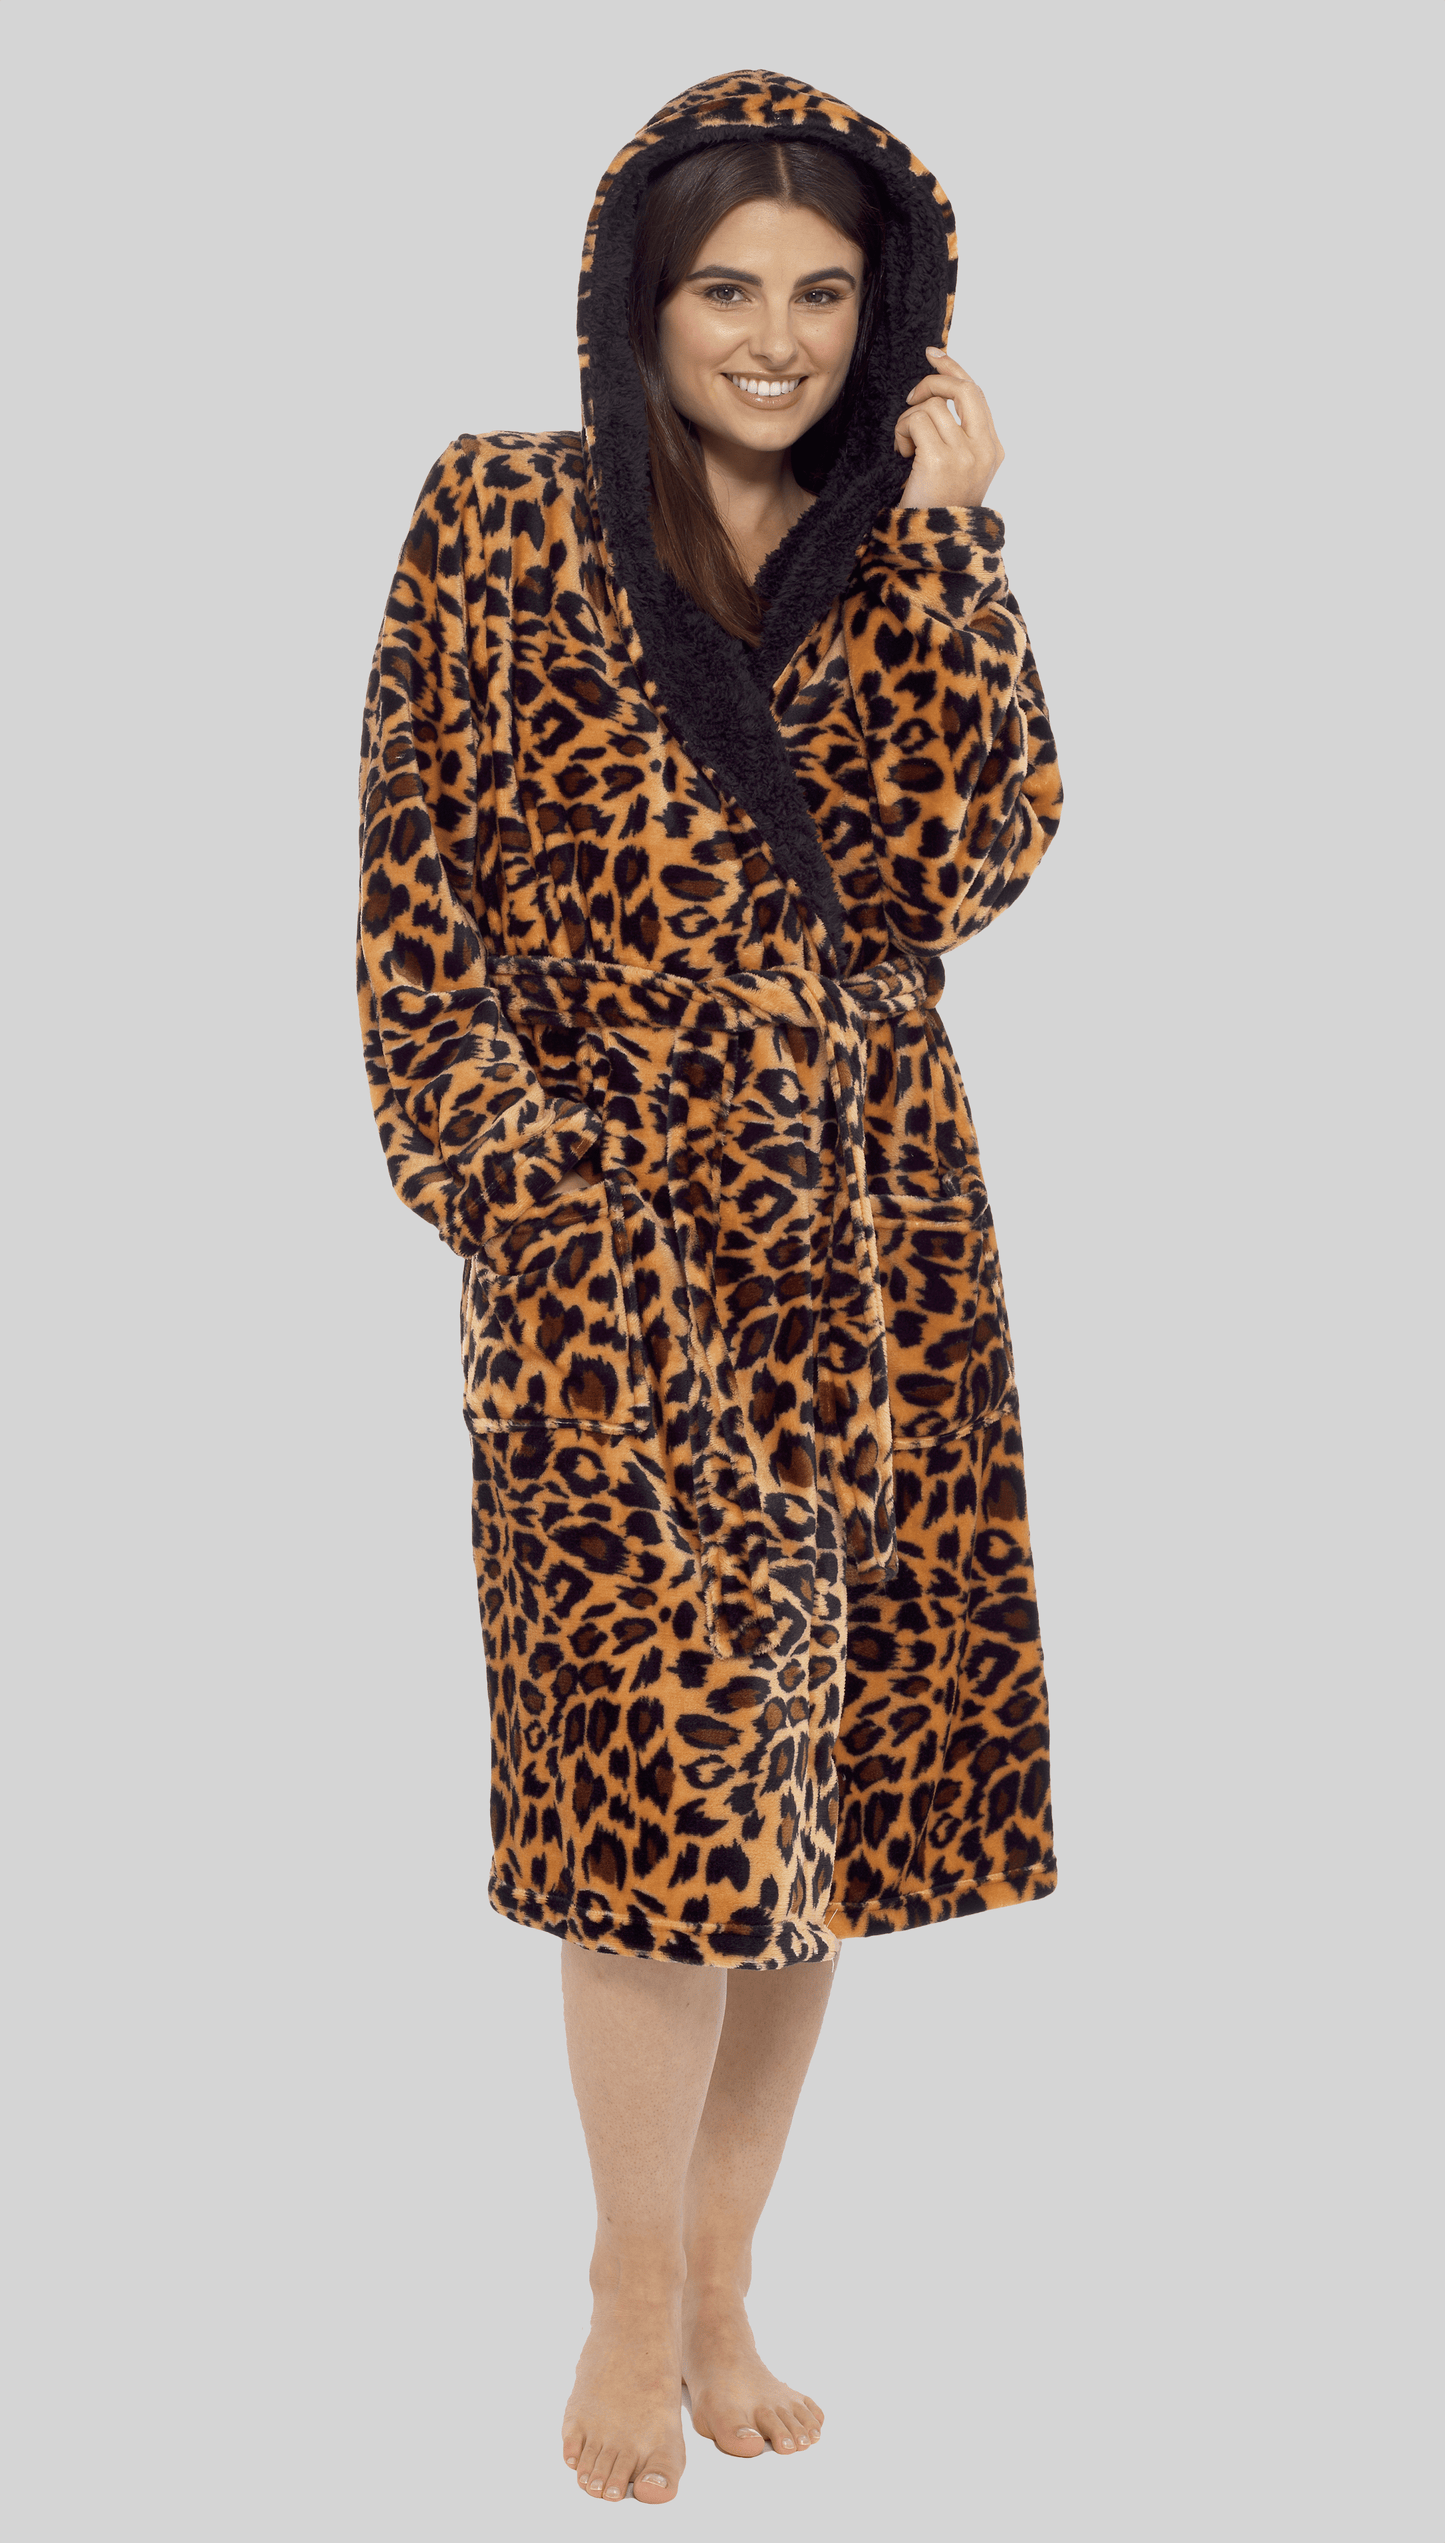 Leopard Plush Fleece Hooded Robe Dressing Gown With Reversible Sherpa Lining SMALL | UK 8-10 Daisy Dreamer Dressing Gown